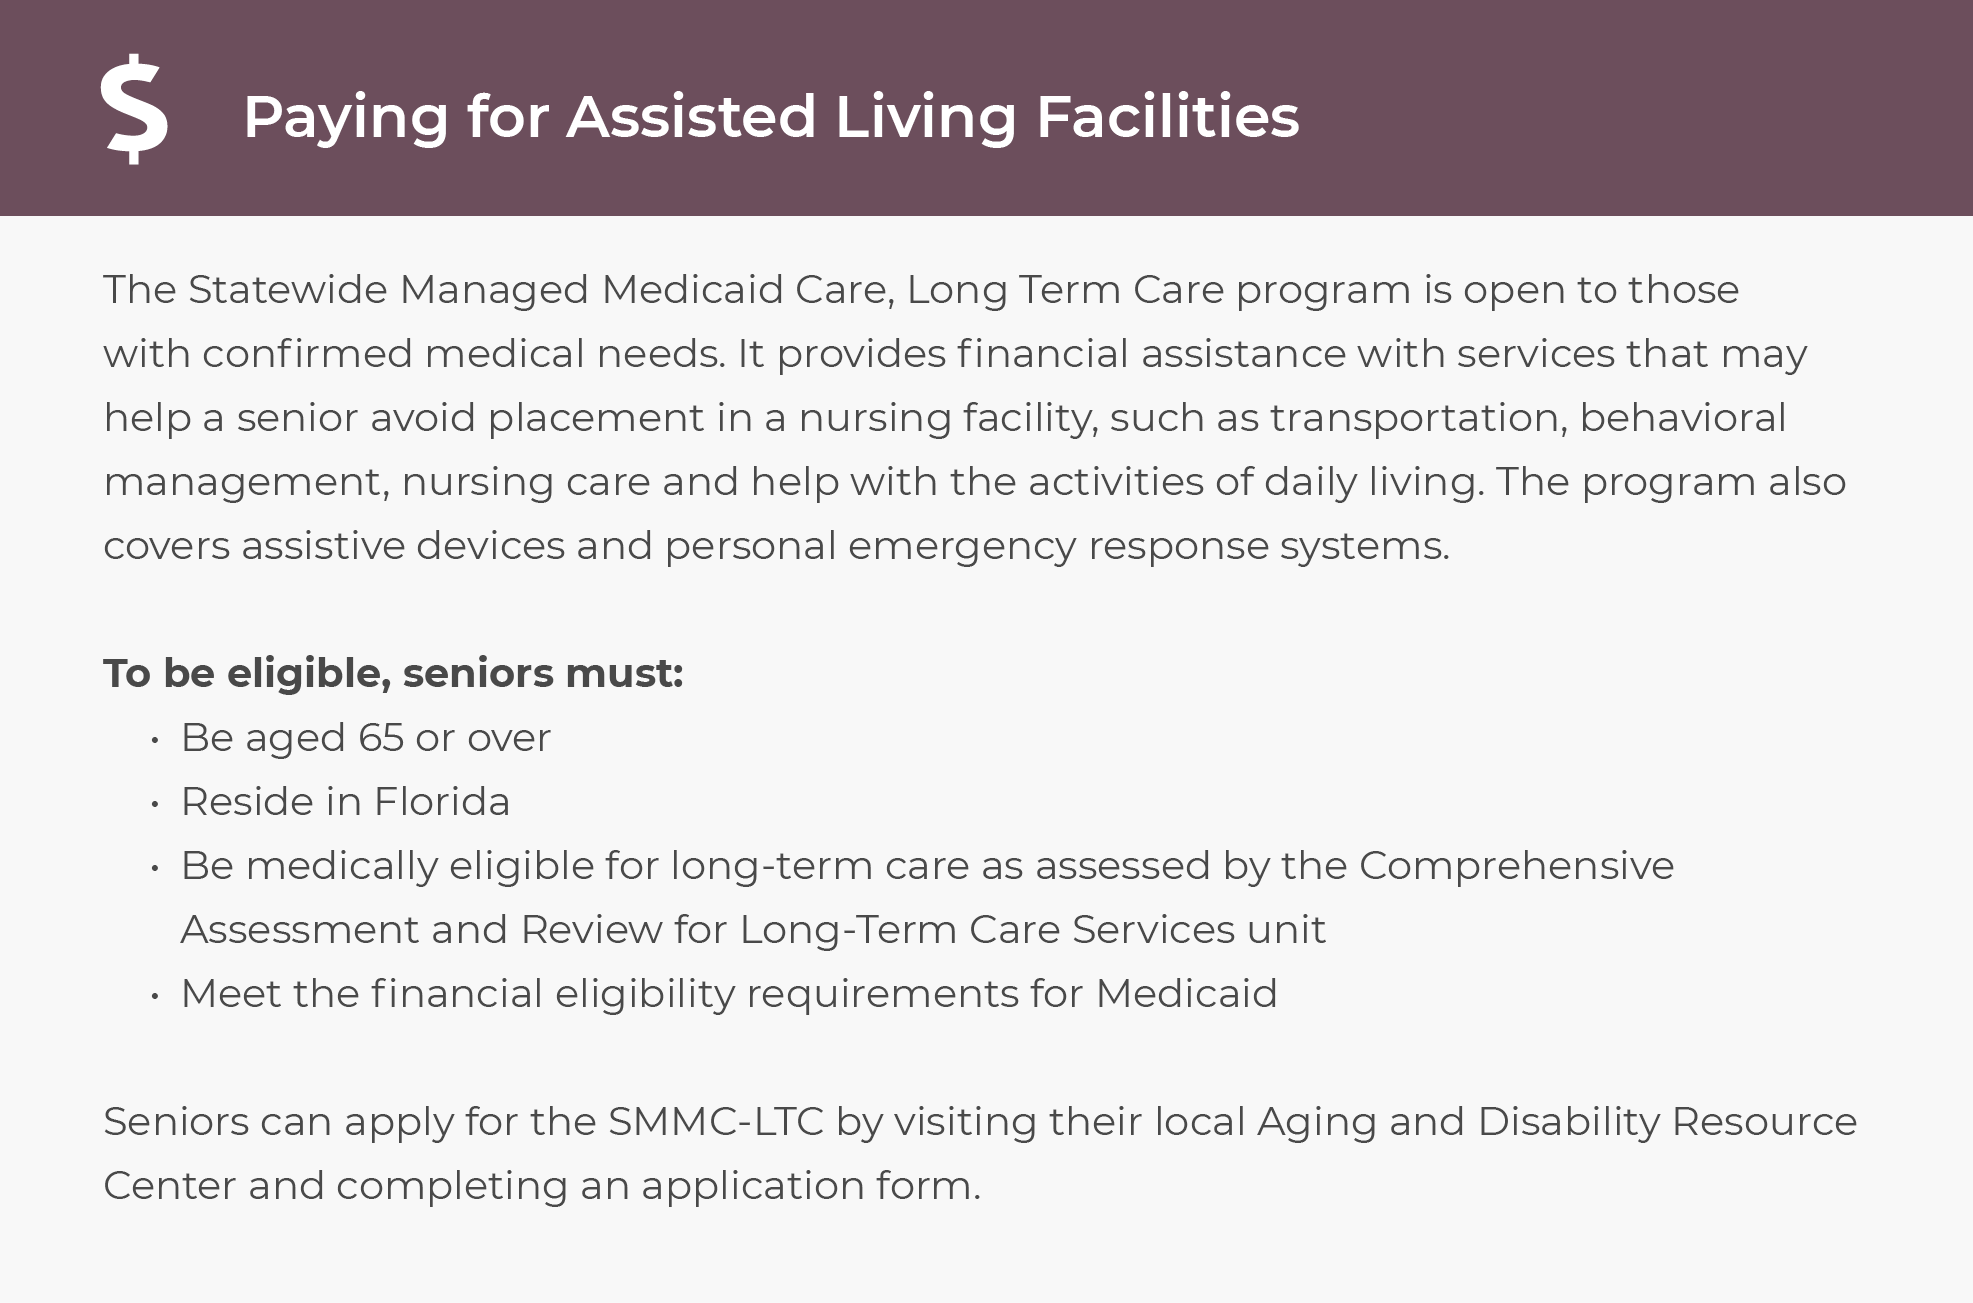 More ways to pay for assisted living in Florida